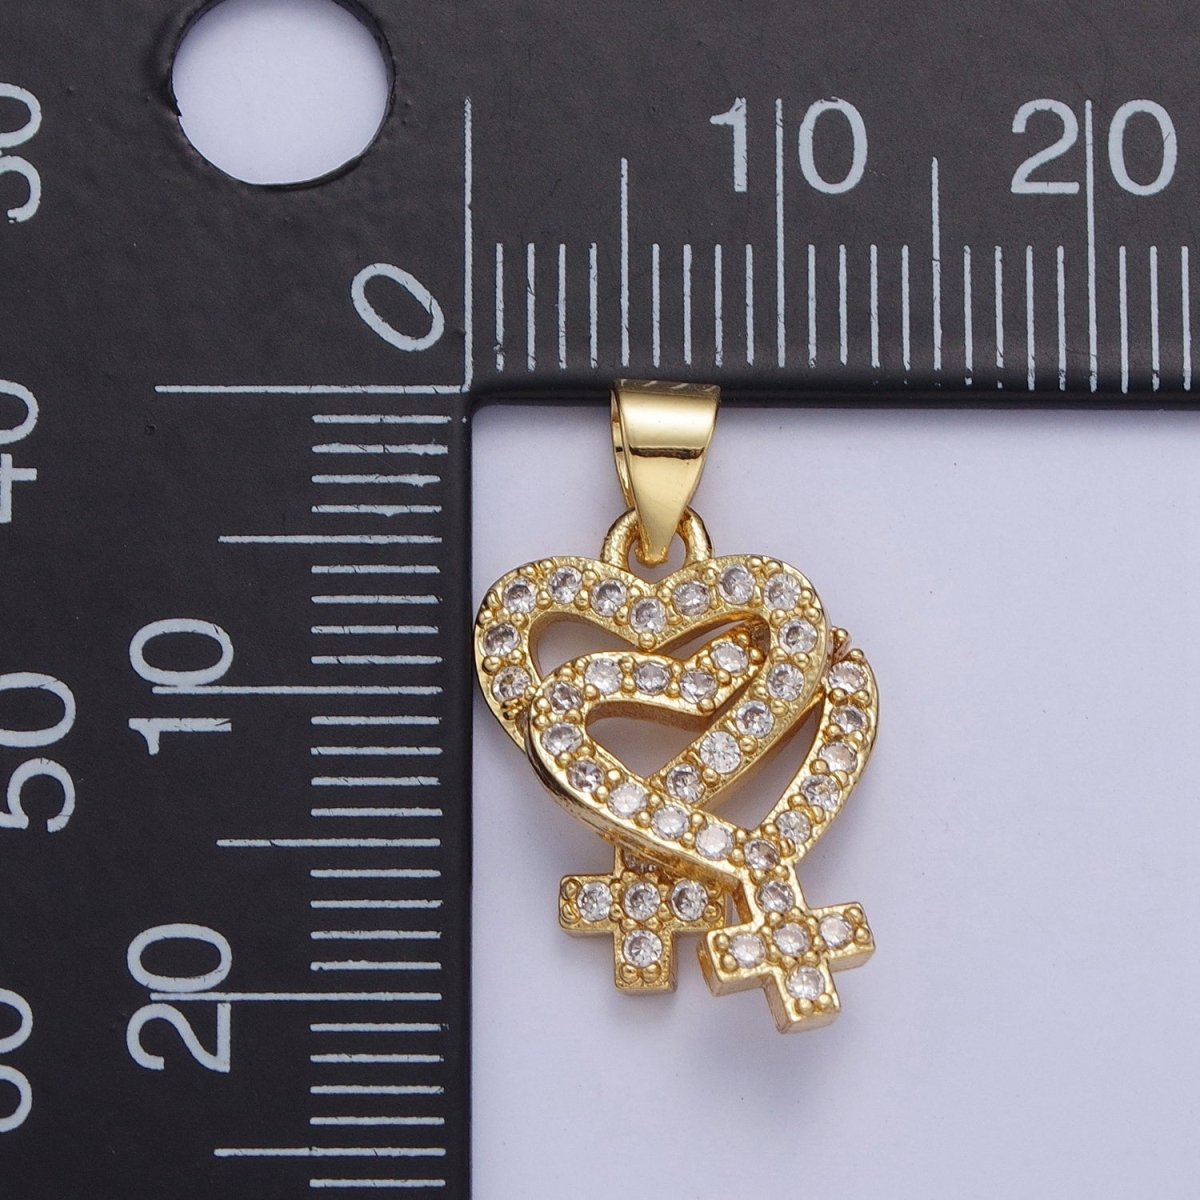 Micro Pave Lesbian Pendant 24K Gold Filled Lesbian Jewelry Inspired Pride Necklace Bracelet Charm Lesbian Gift Couple Necklace X-424 - DLUXCA